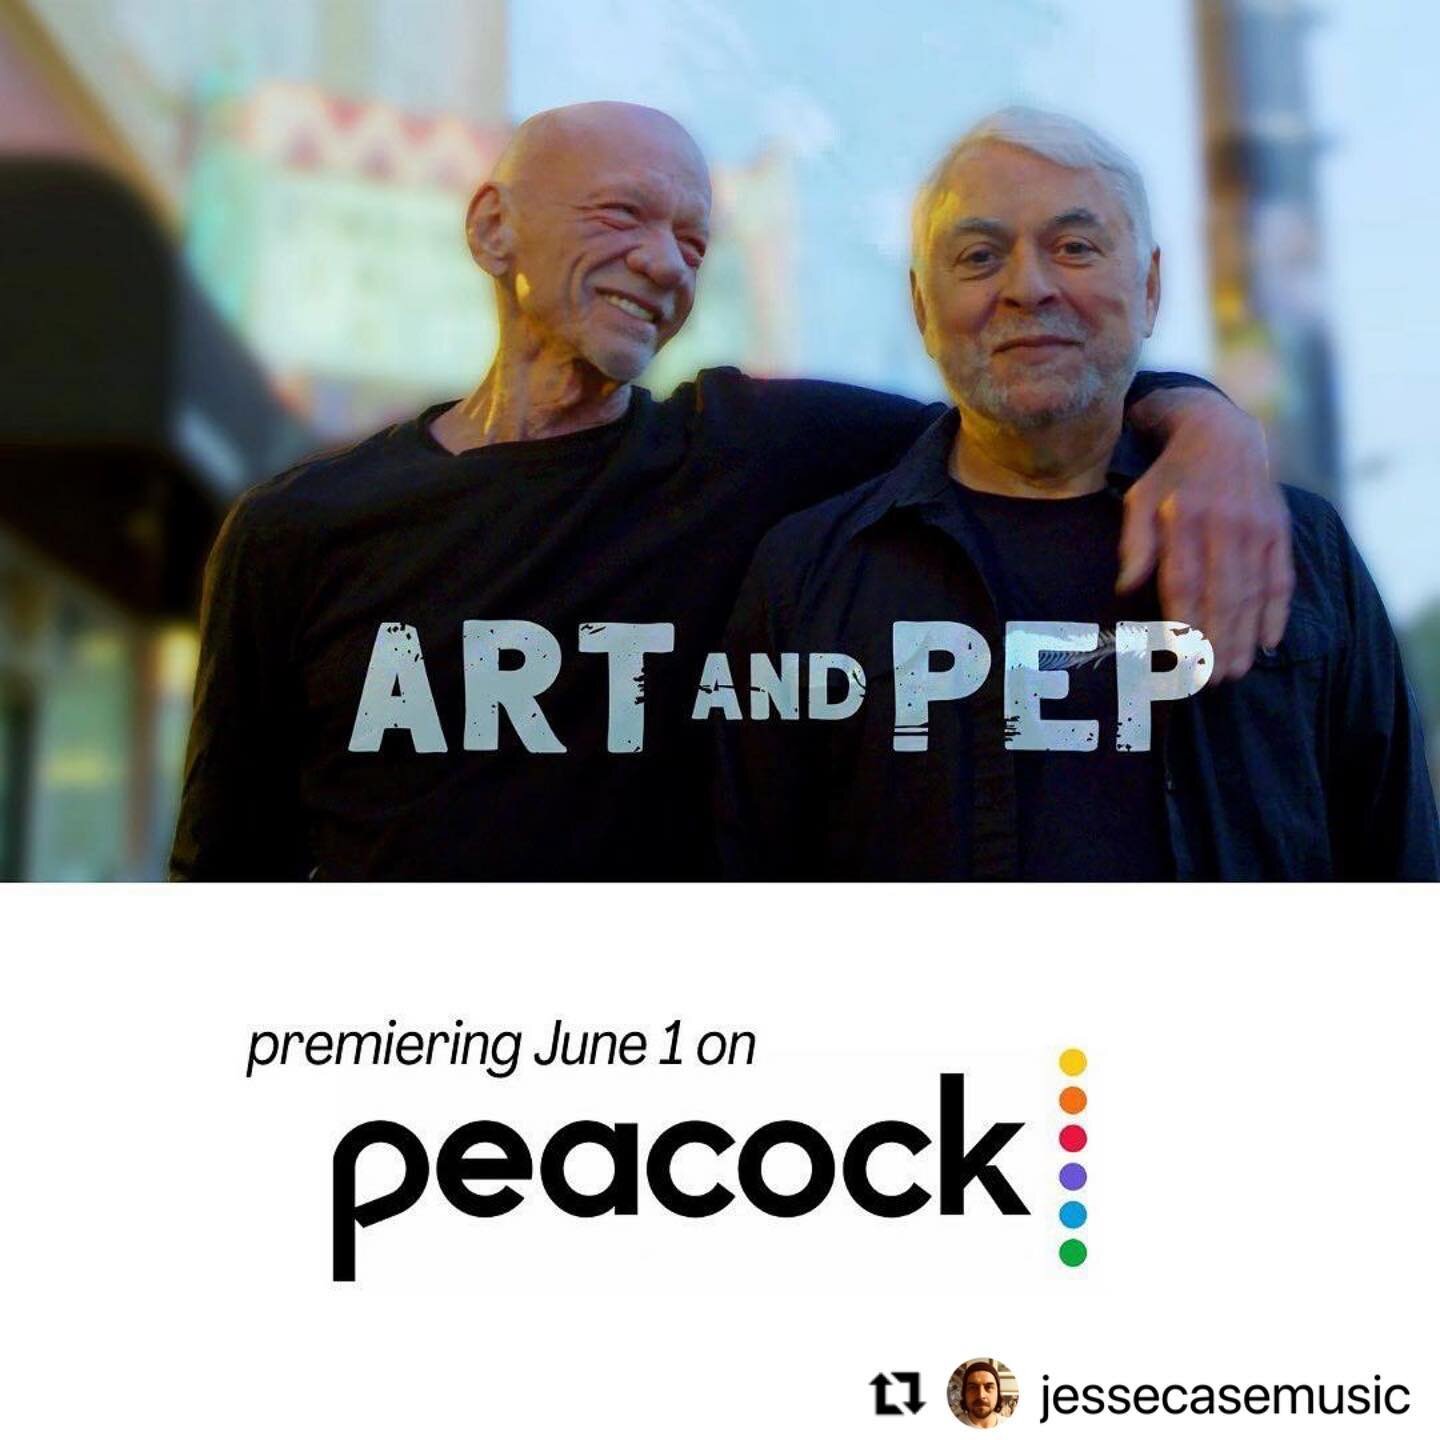 #Repost @jessecasemusic &amp; @artandpep 
・・・
Awesome news for this amazing documentary. I got to co-compose the score so I&rsquo;ve seen it a LOT of times, and trust me it&rsquo;s well worth the watch. 
・・・
We are thrilled to share that ART AND PEP 